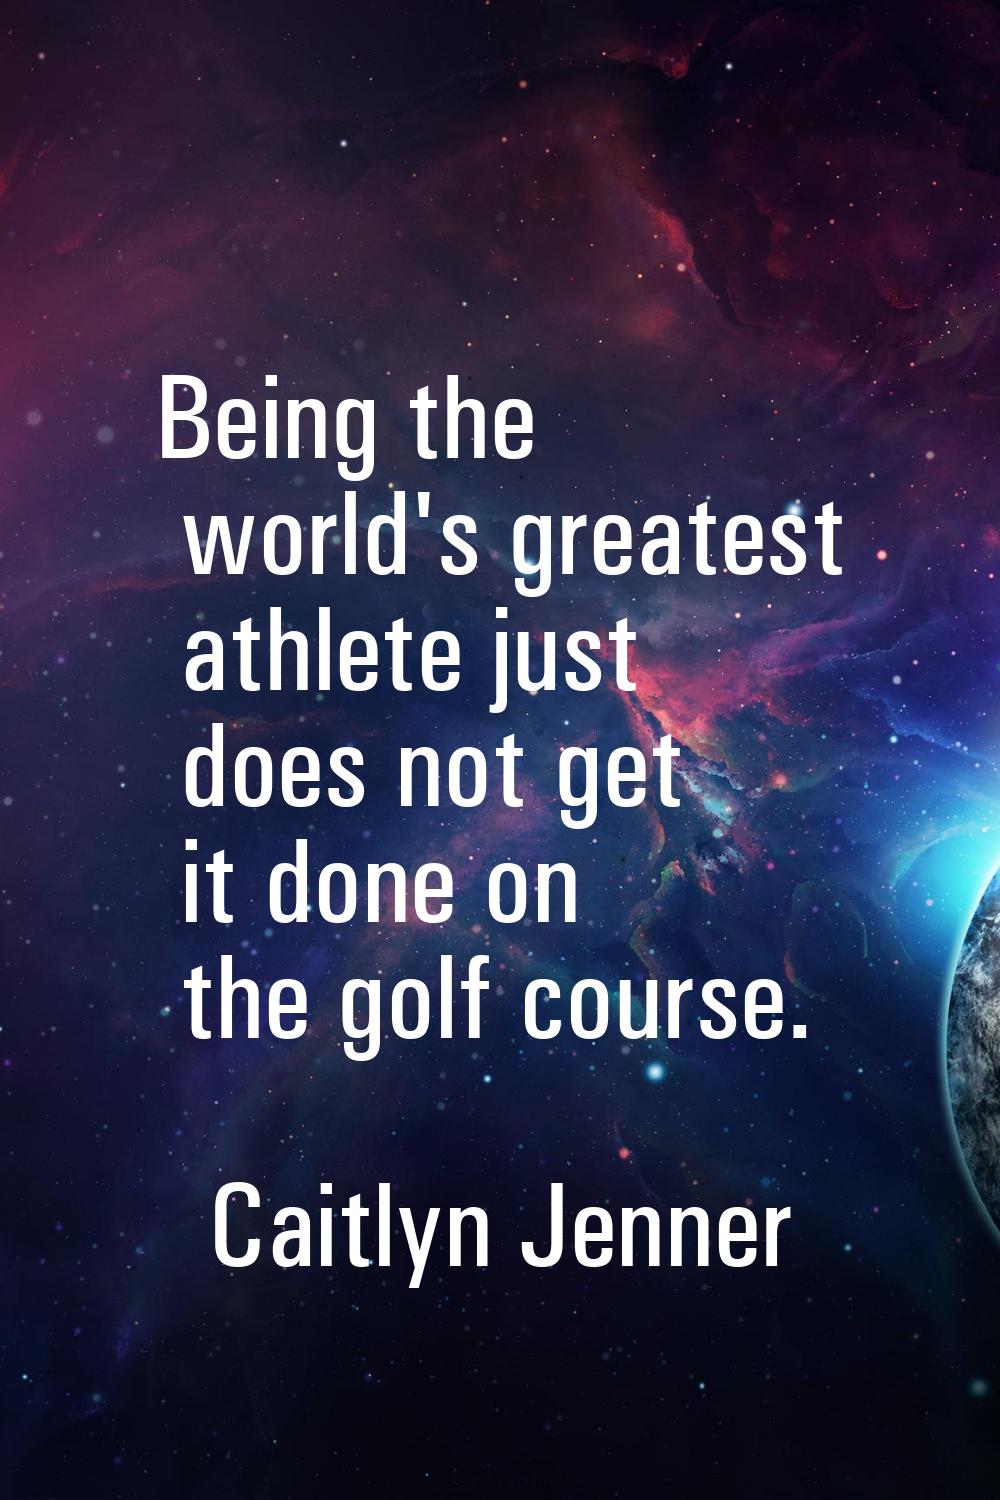 Being the world's greatest athlete just does not get it done on the golf course.